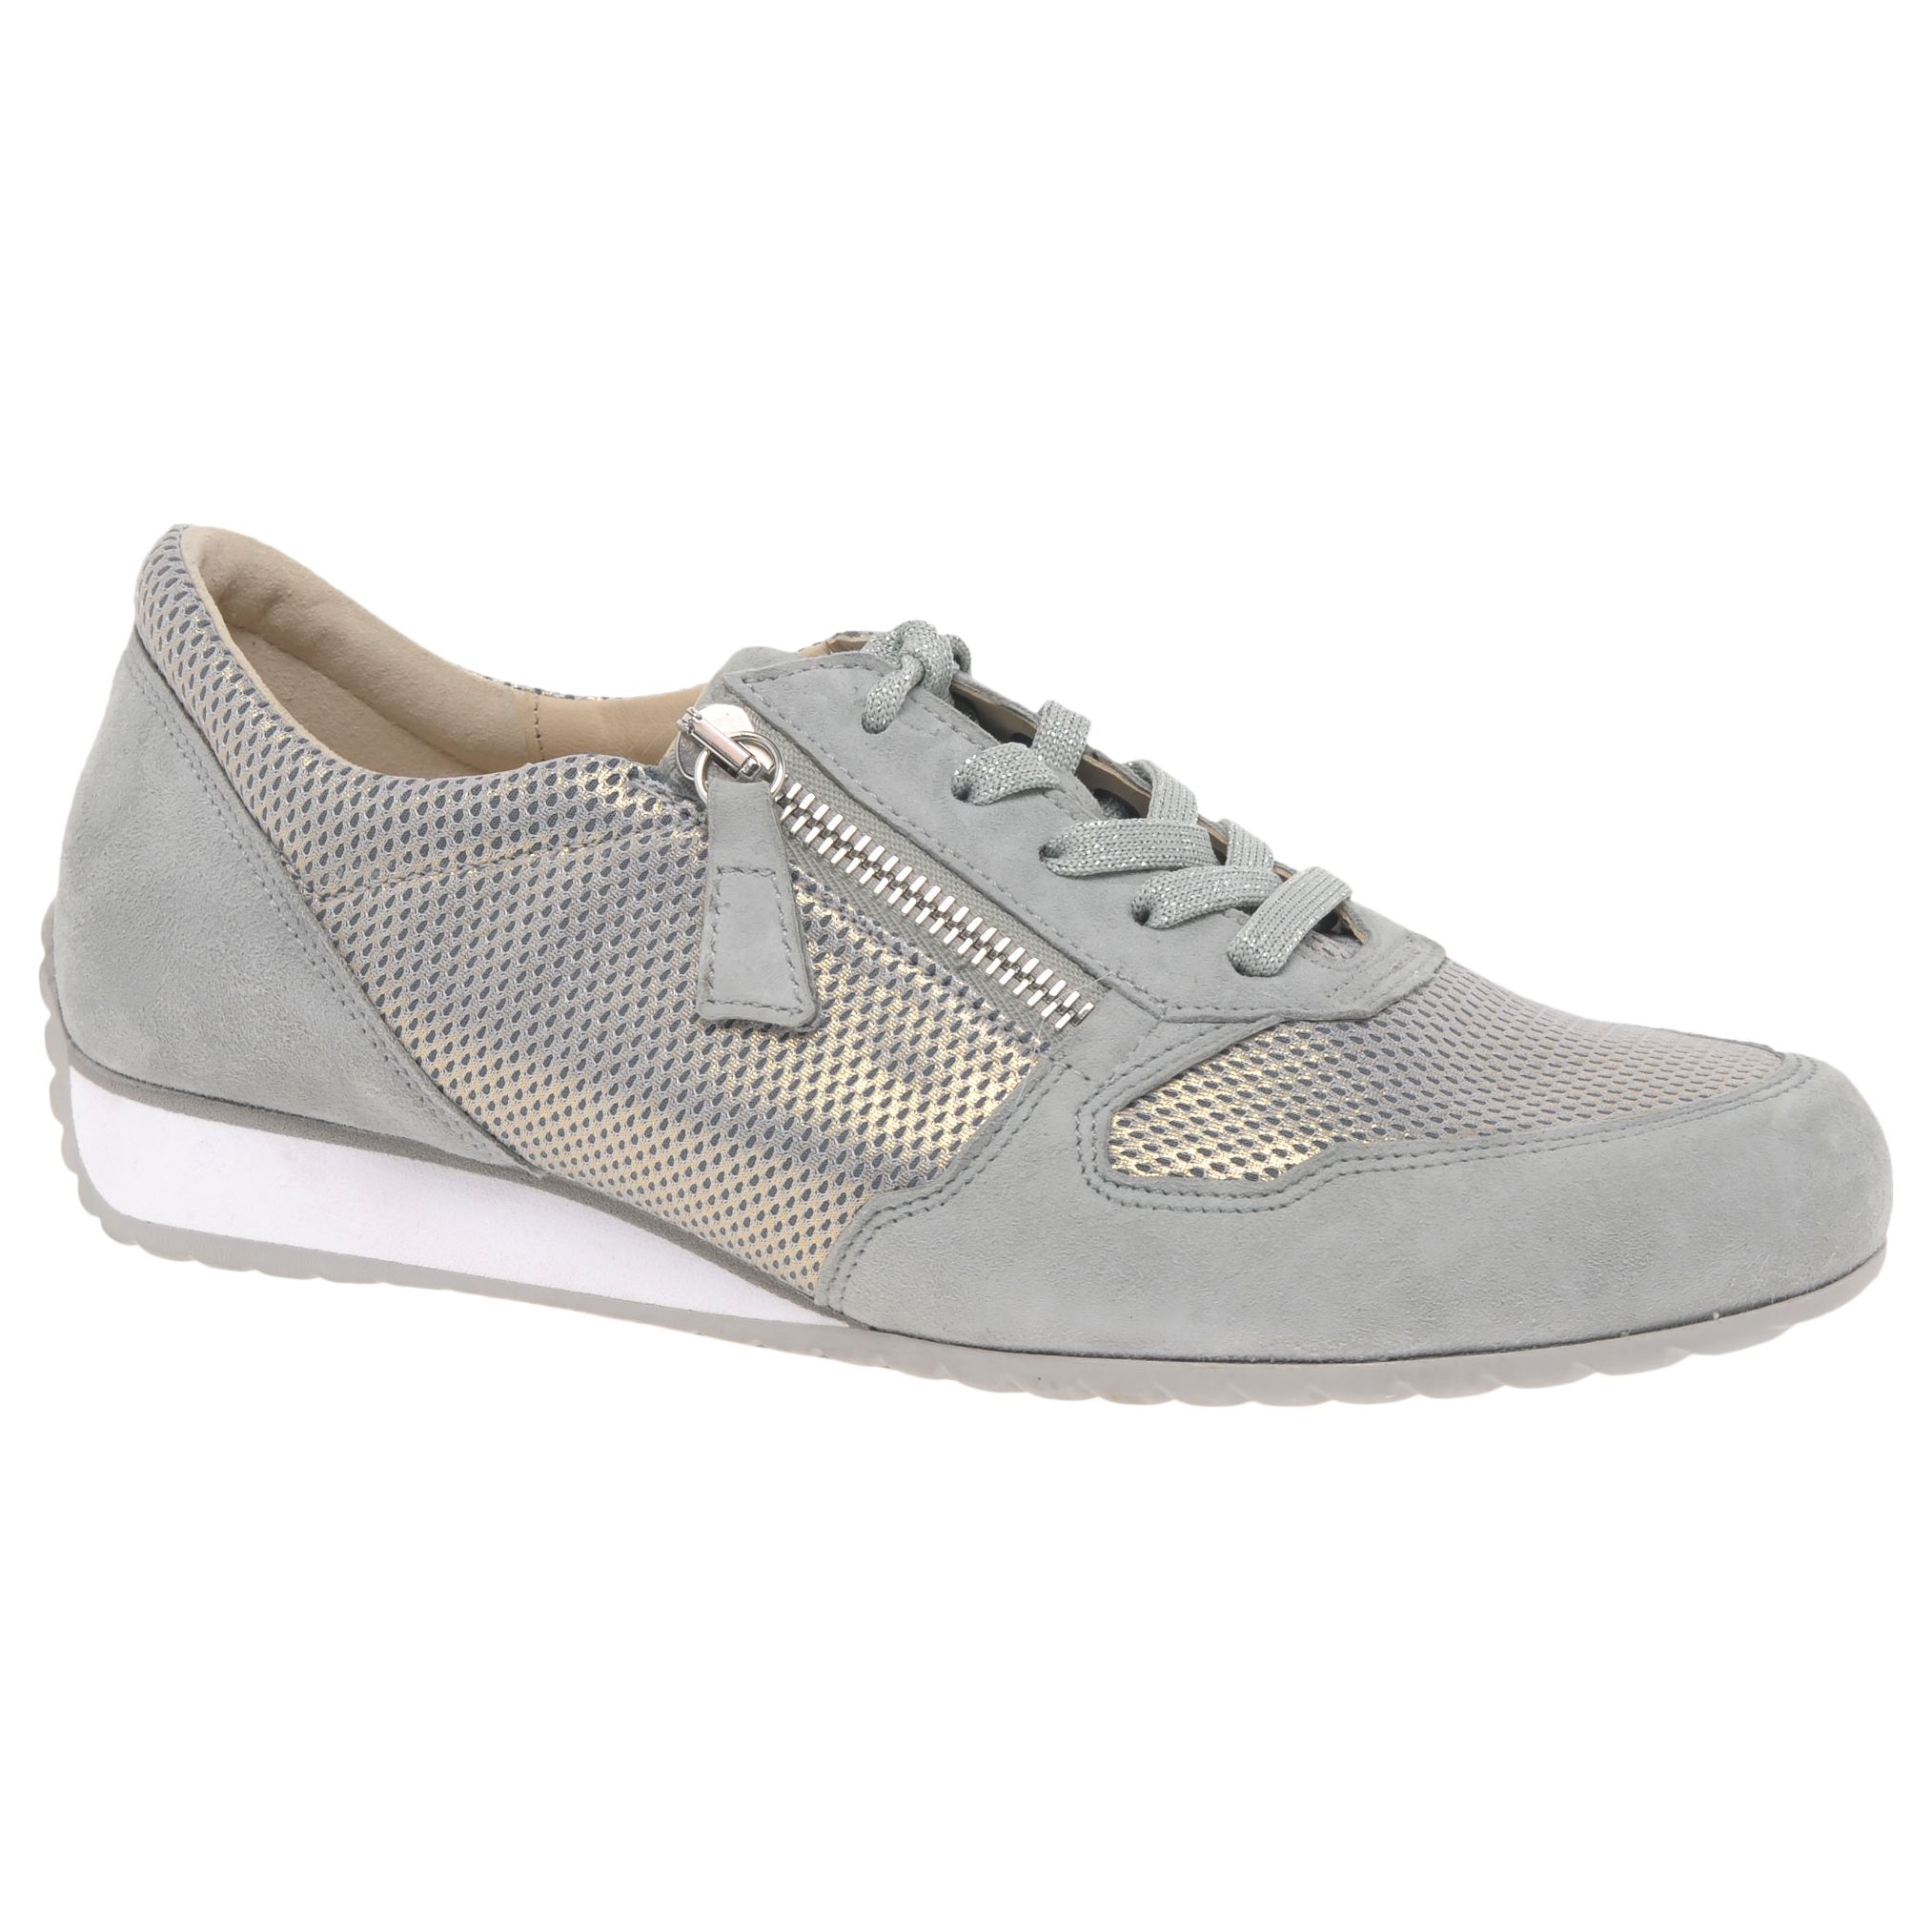 Gabor Maybelle Wide Fit Lace Up Trainers, Light Grey Suede